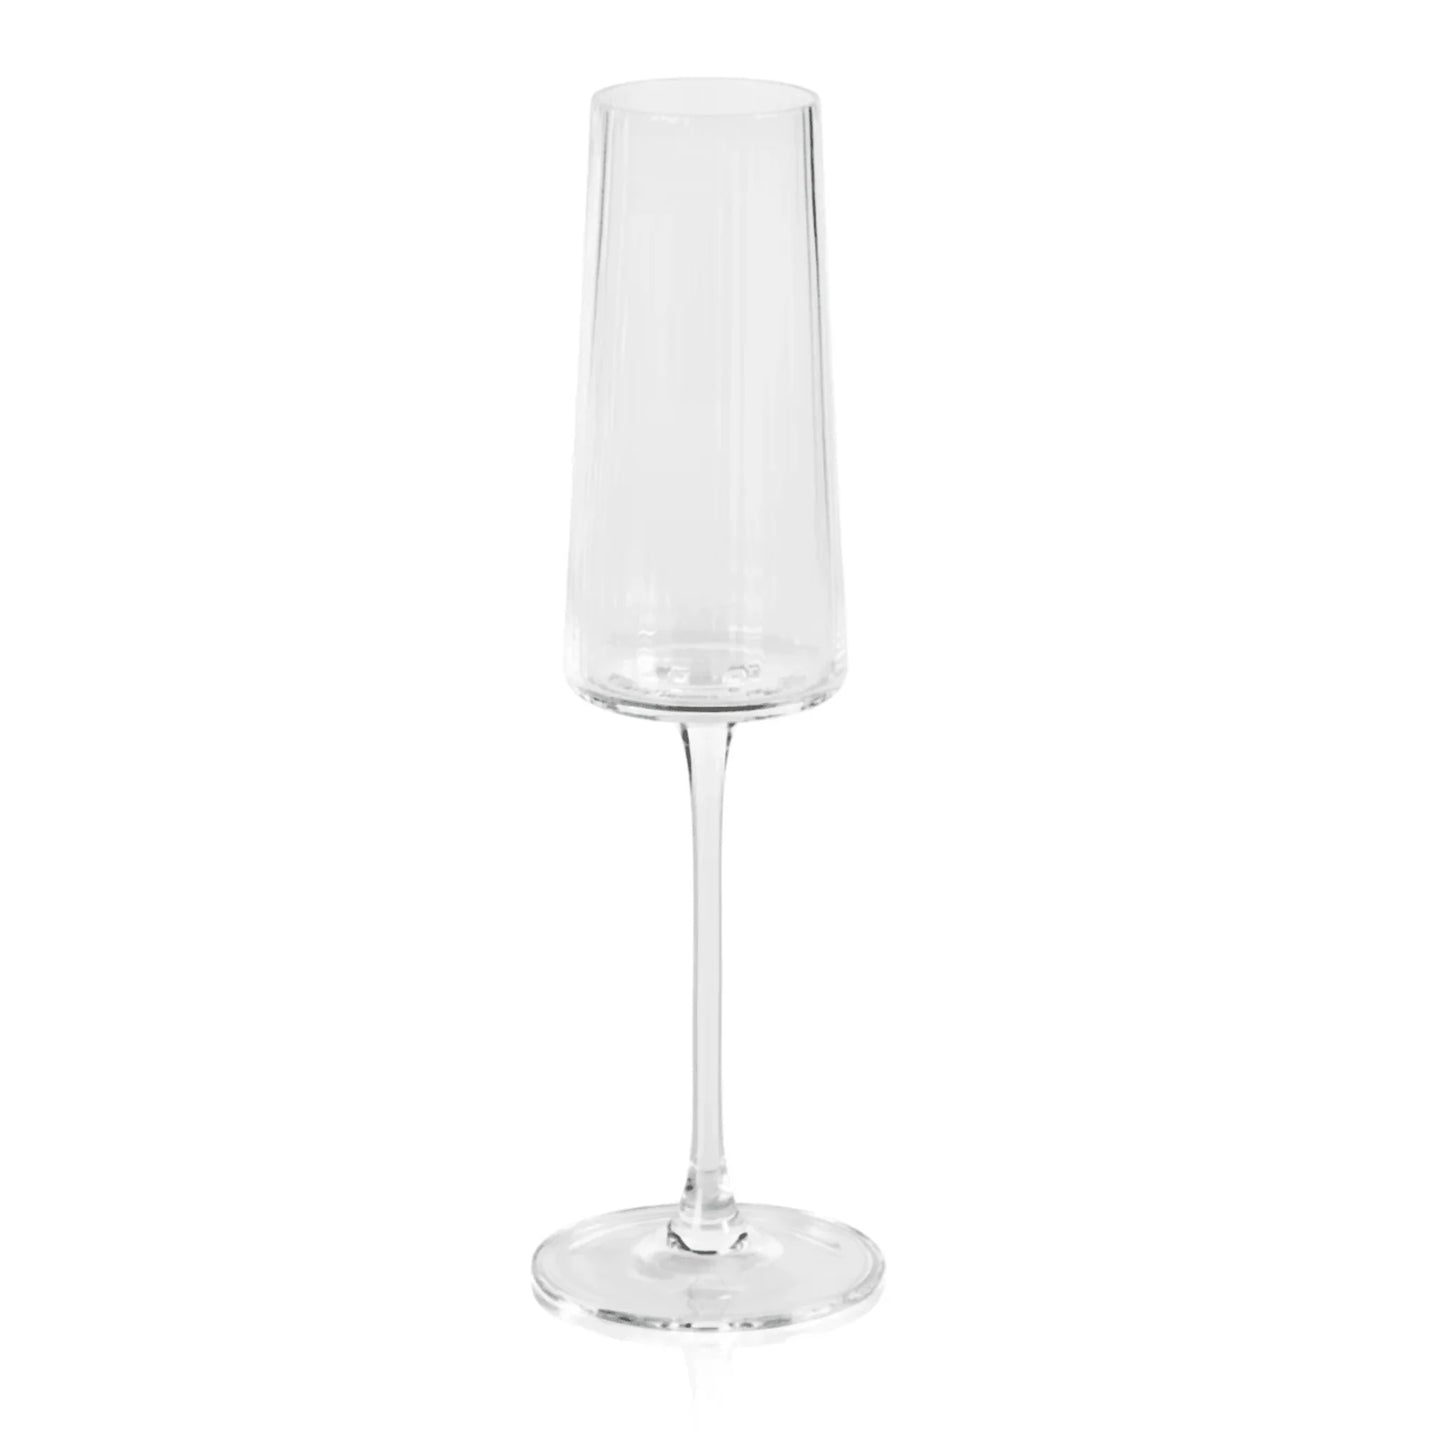 REED CHAMPAGNE GLASS